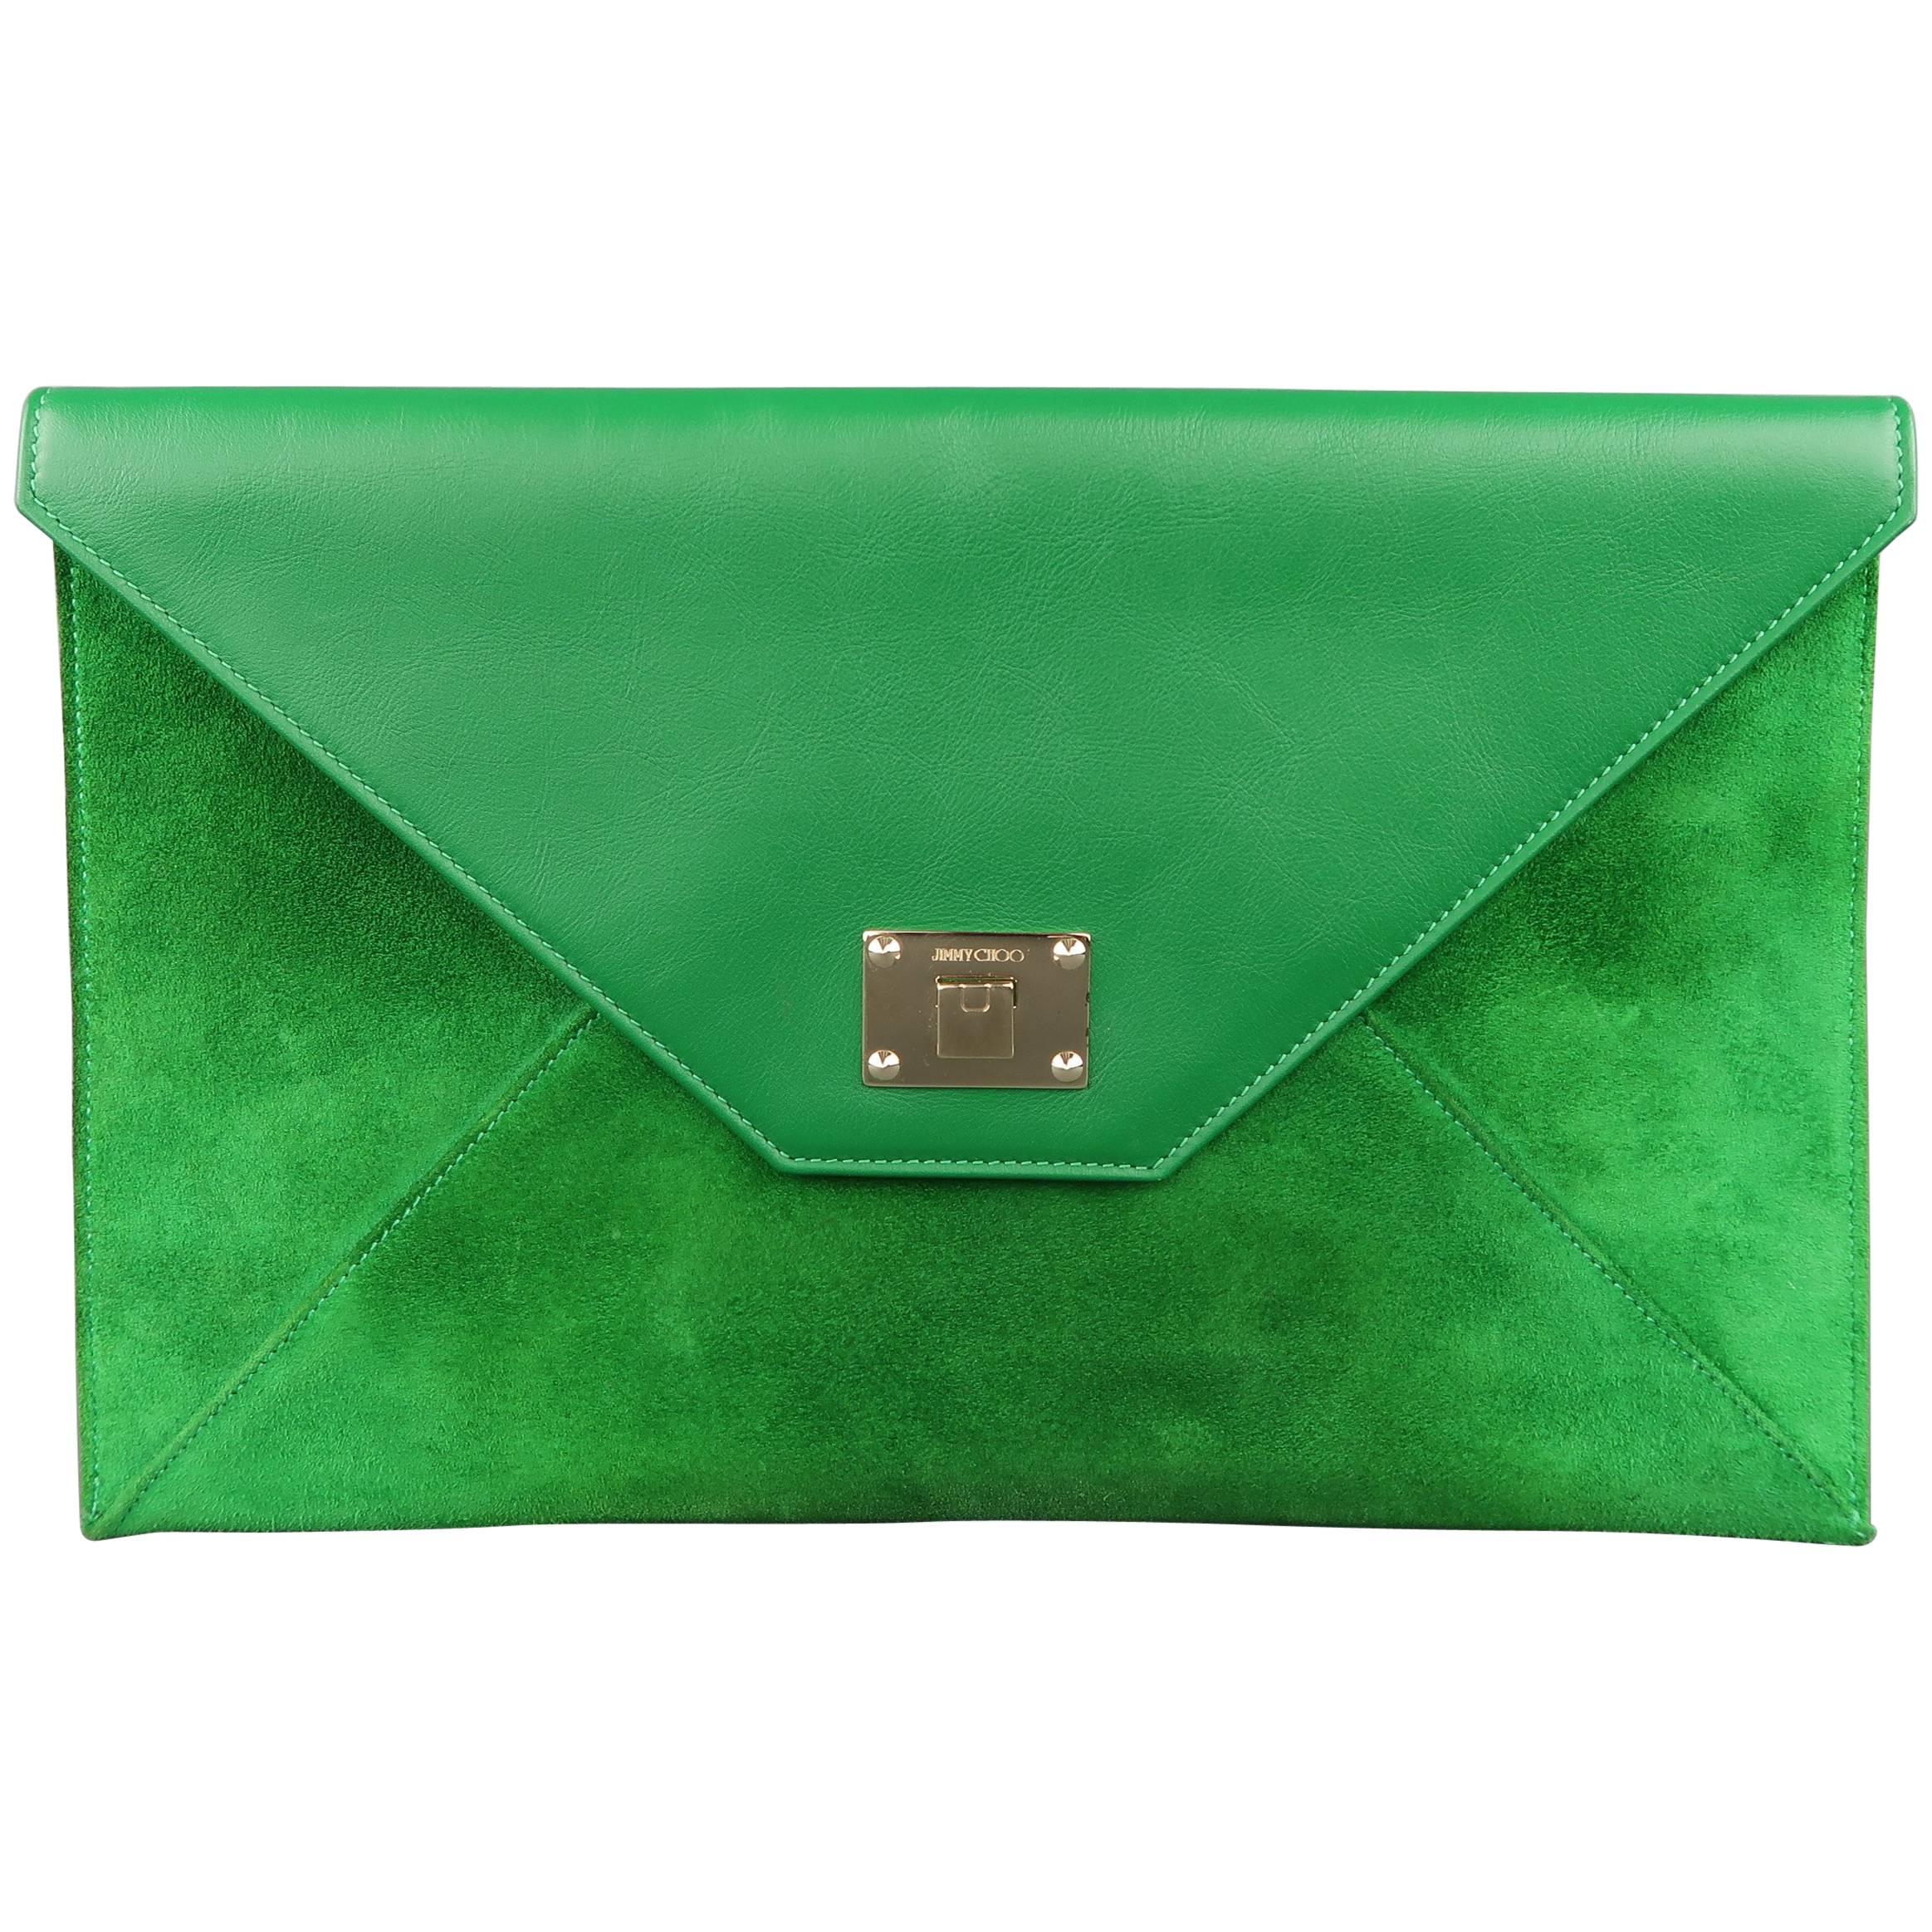 Jimmy Choo Green Leather and Suede Rosetta Envelope Clutch